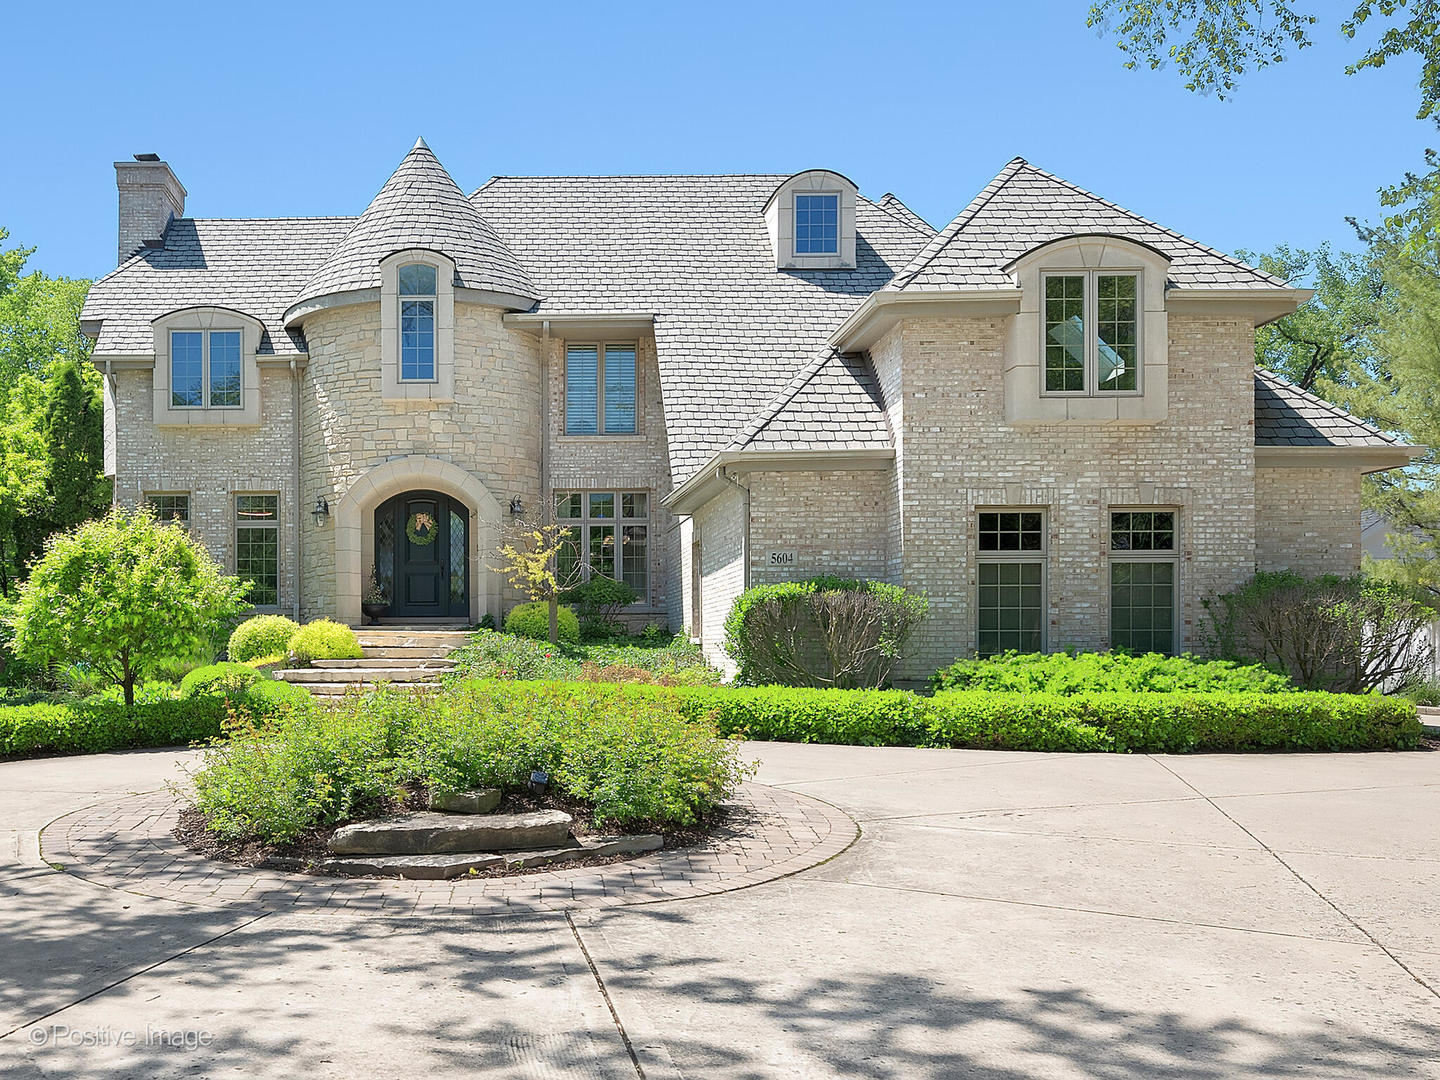 6 House in Hinsdale